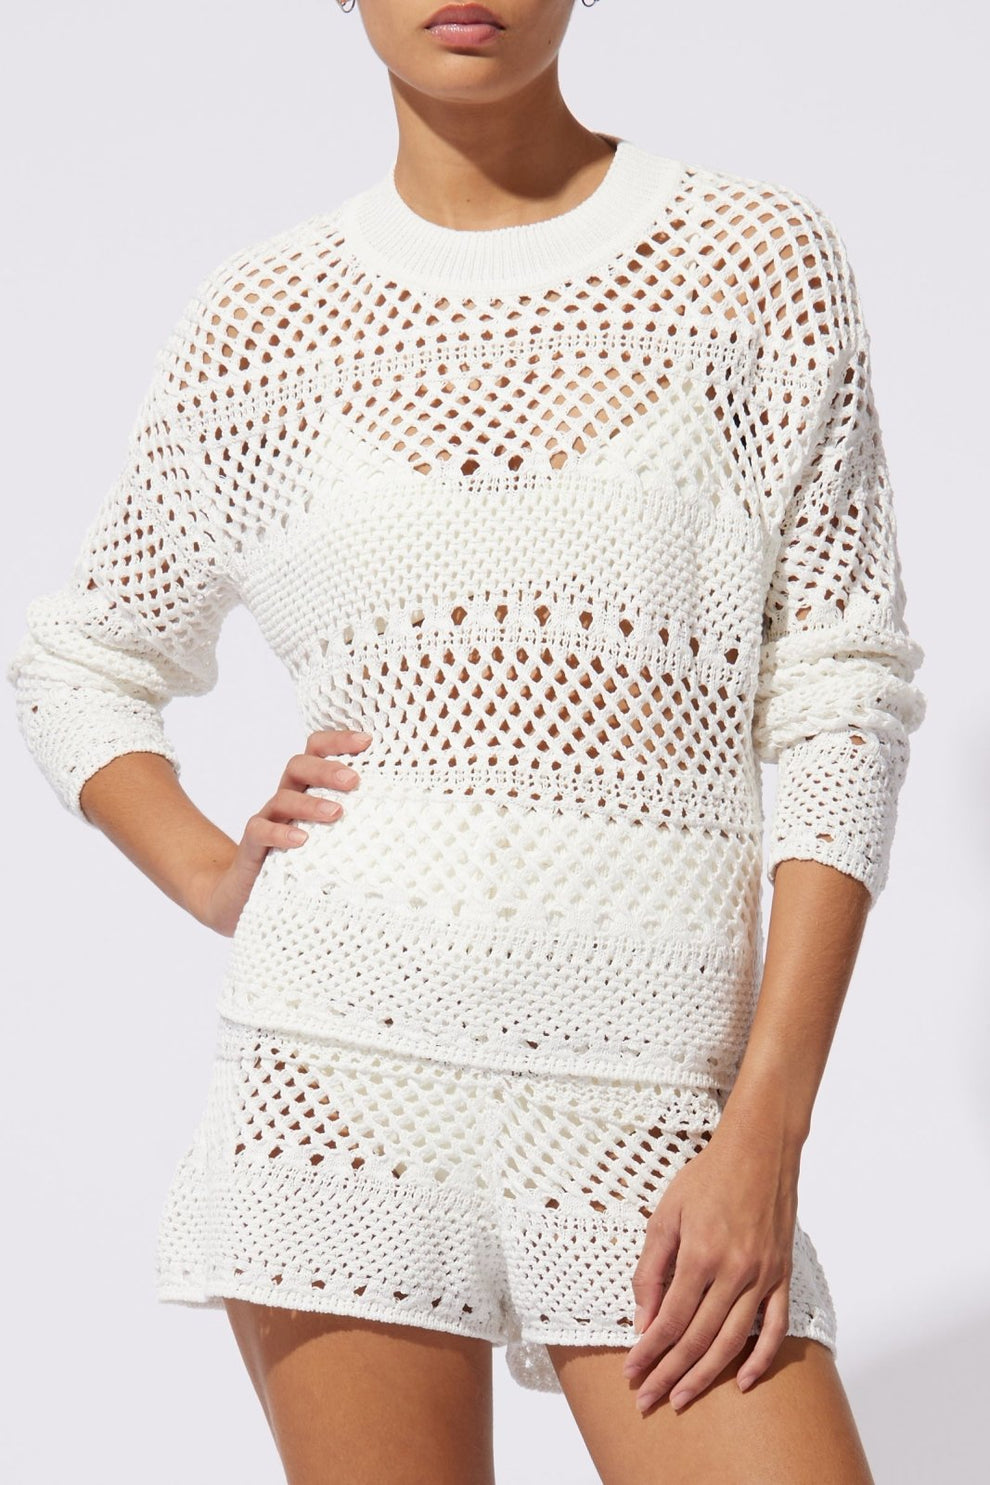 Solid & Striped - The Max Sweater - Crochet Marshmallow